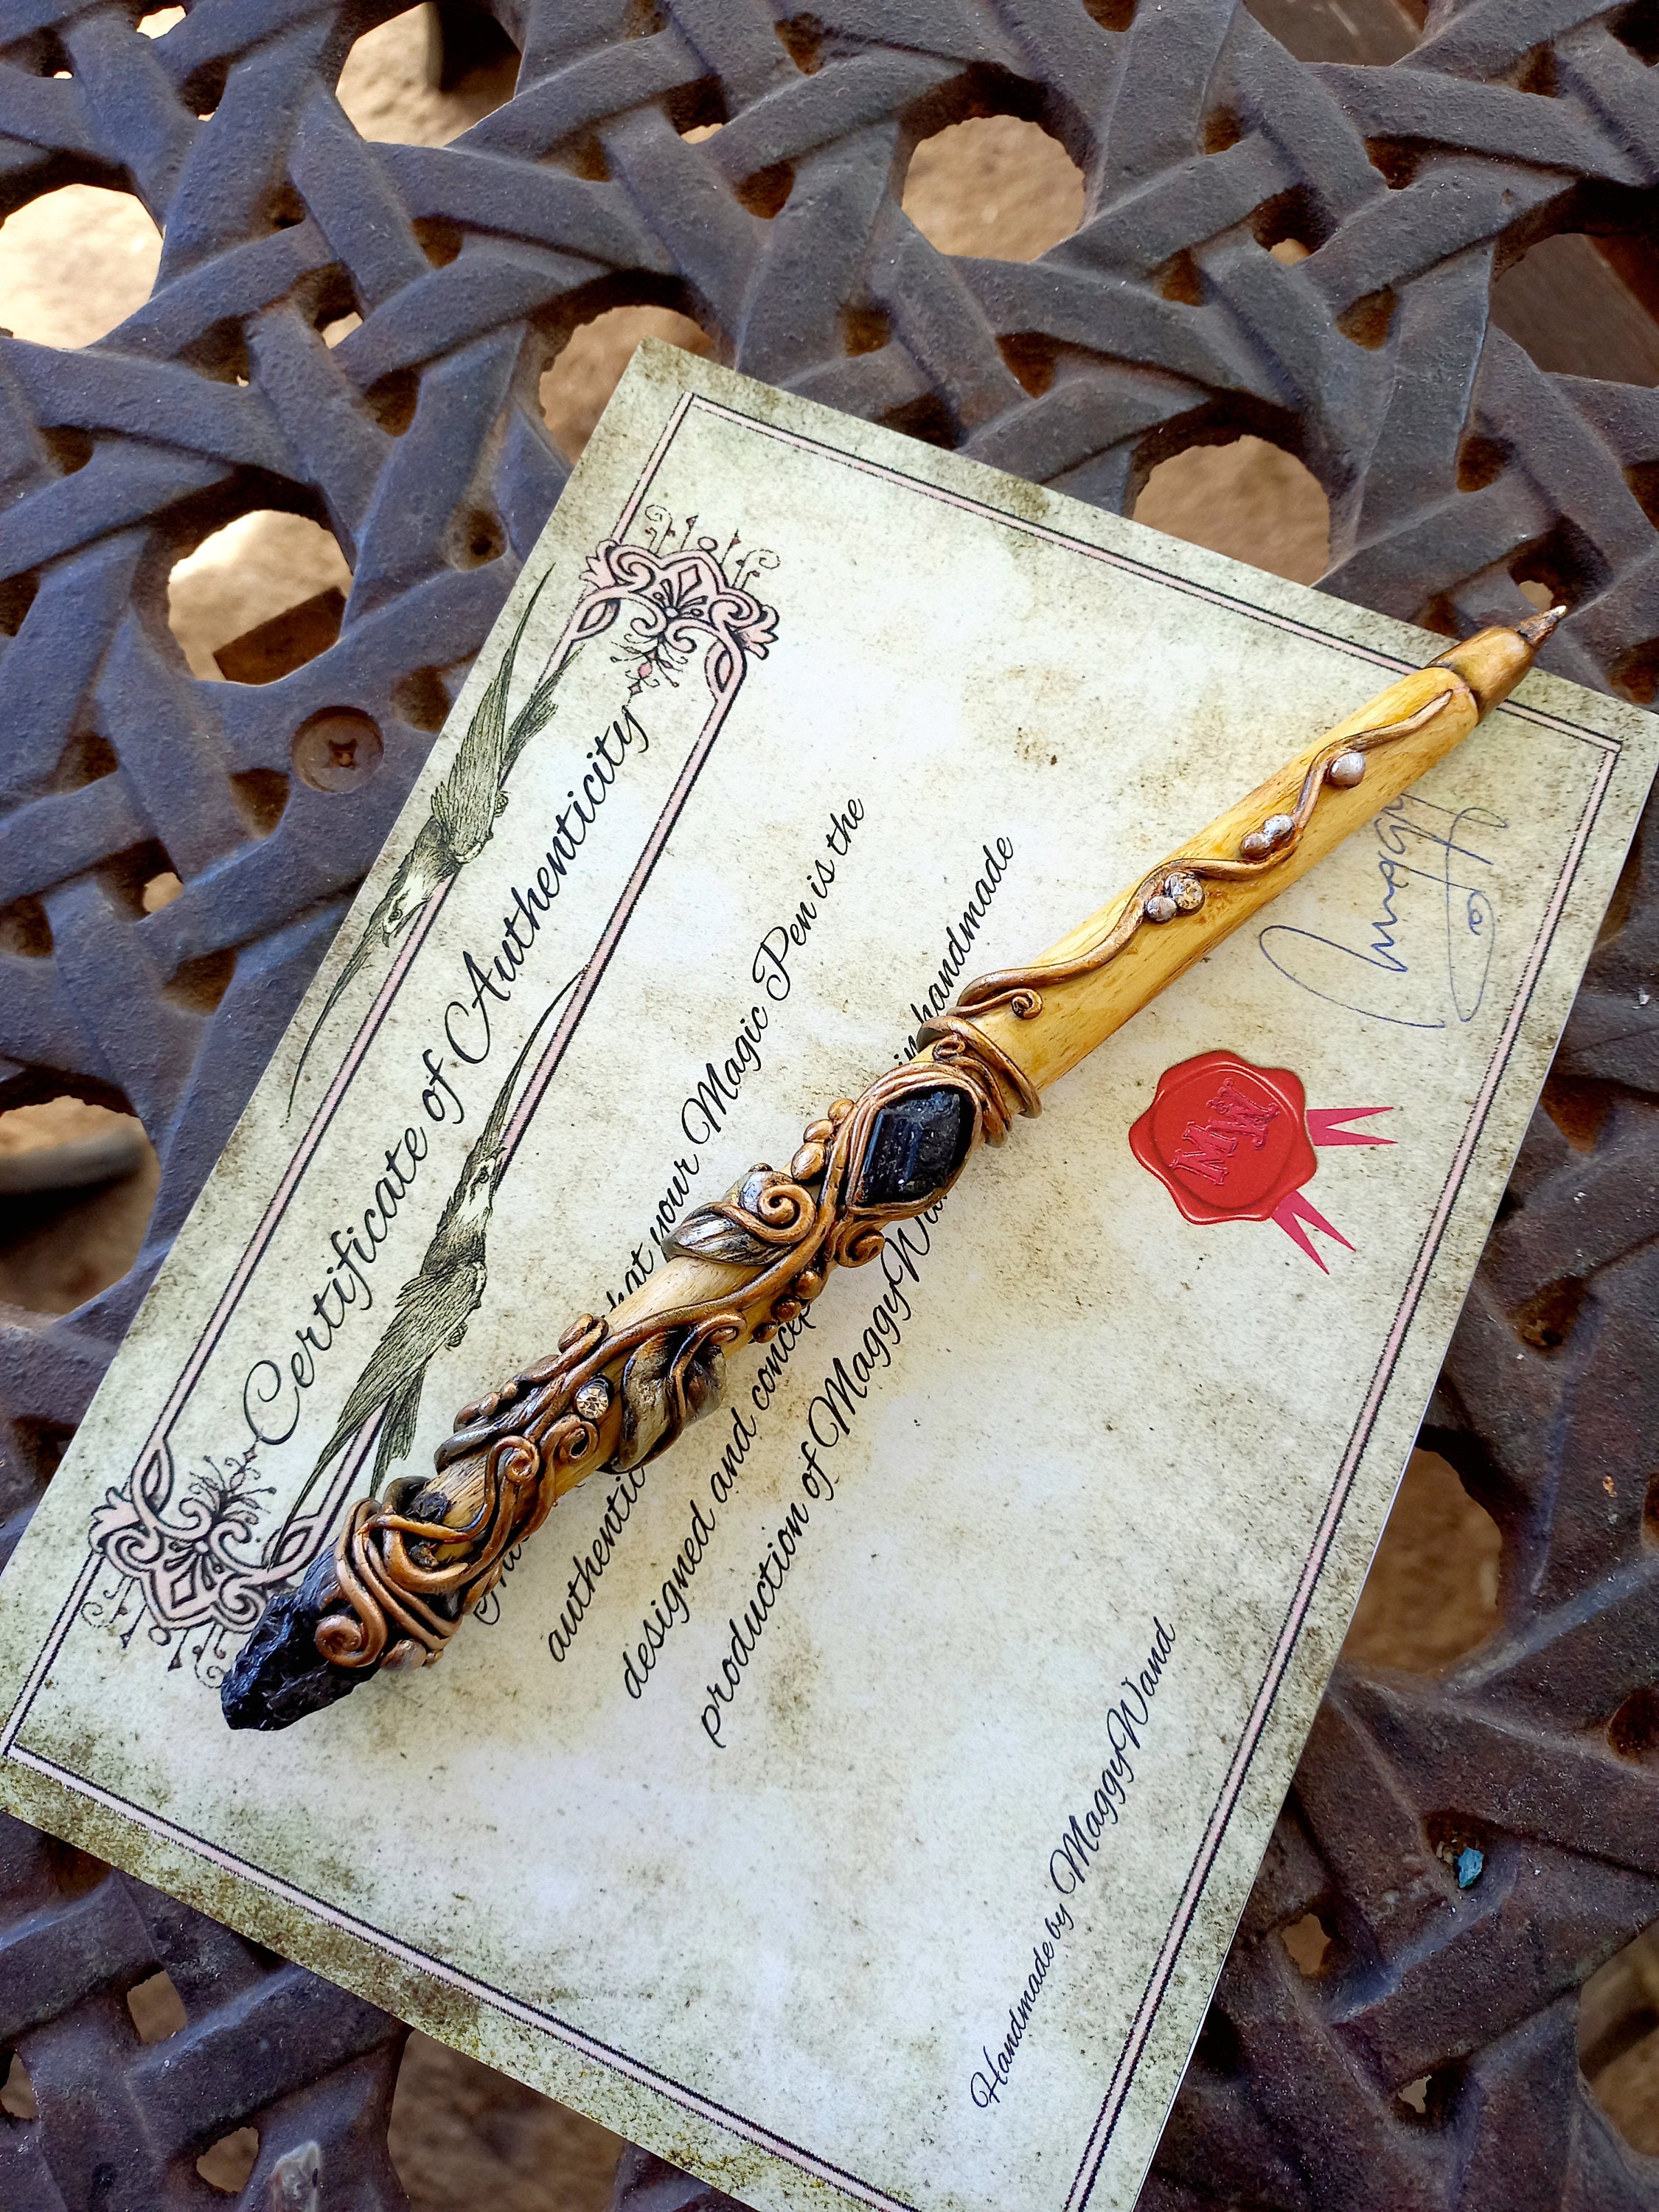 Black Tourmaline Pen, Magical Pencil, Pens, Writer Tools, Witchy Power 